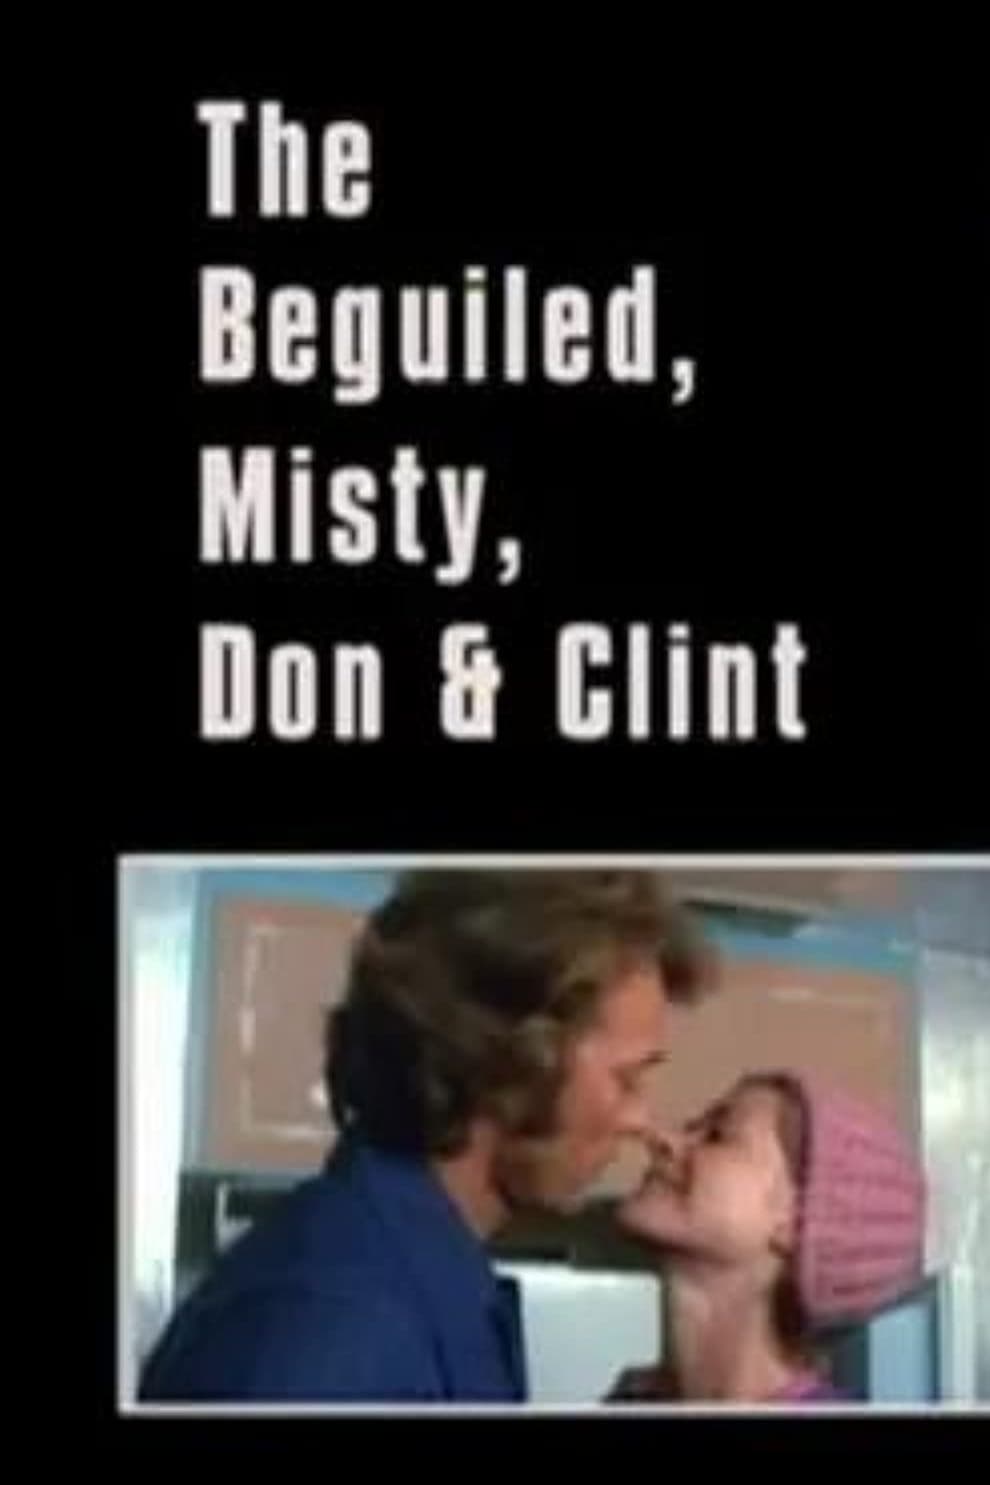 The Beguiled, Misty, Don & Clint